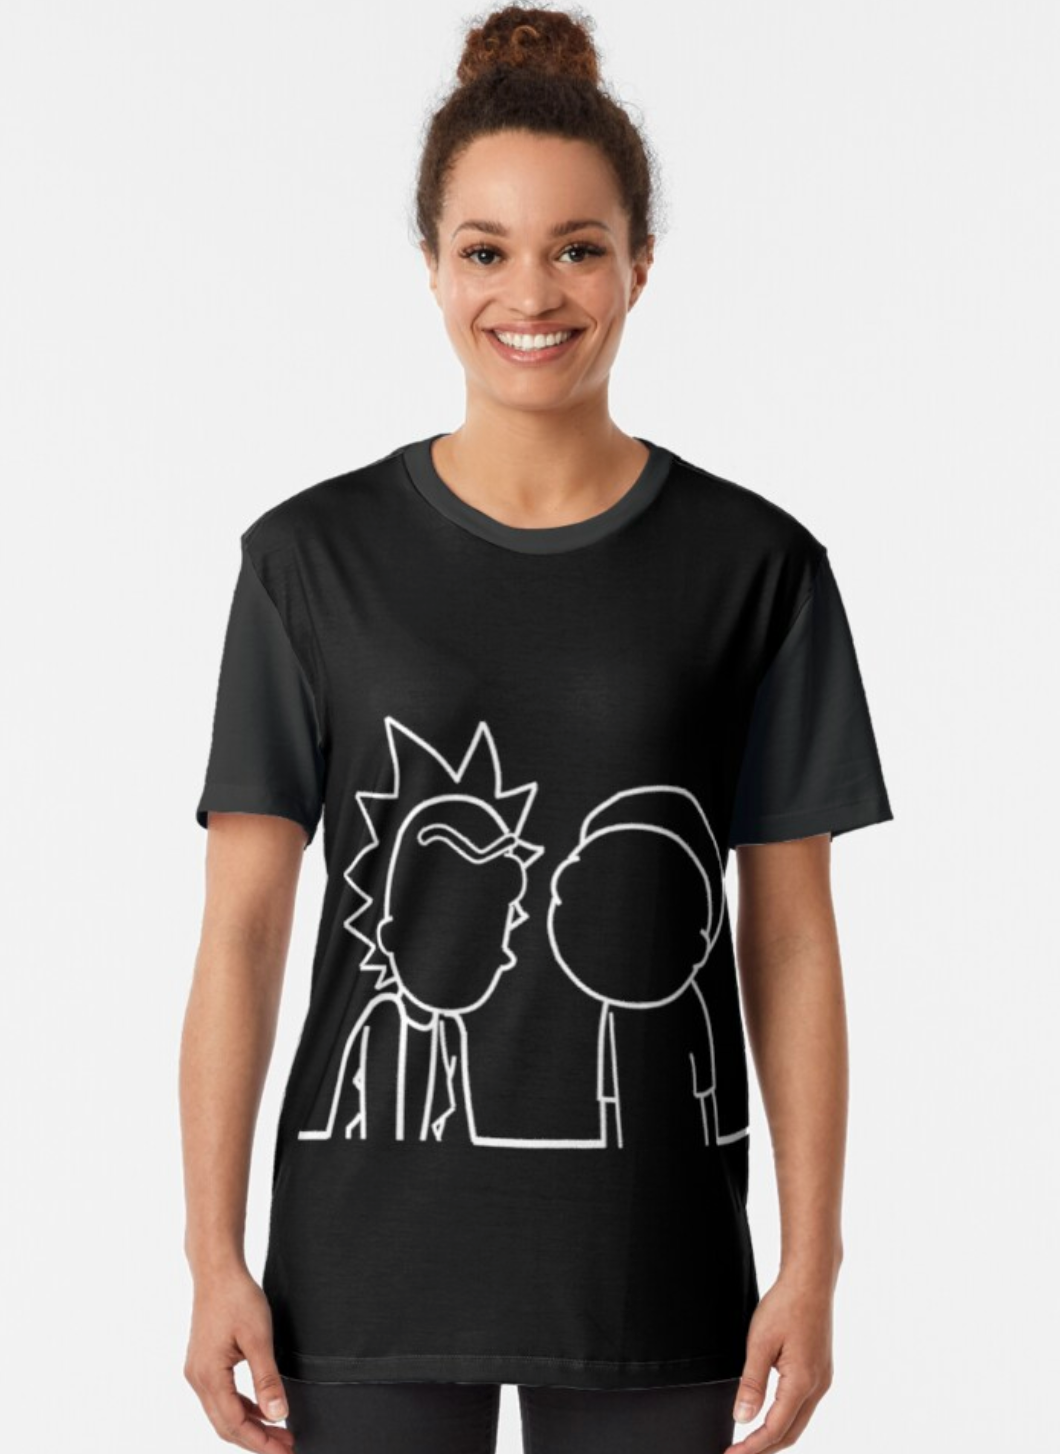 graphic_t-shirt_female.png